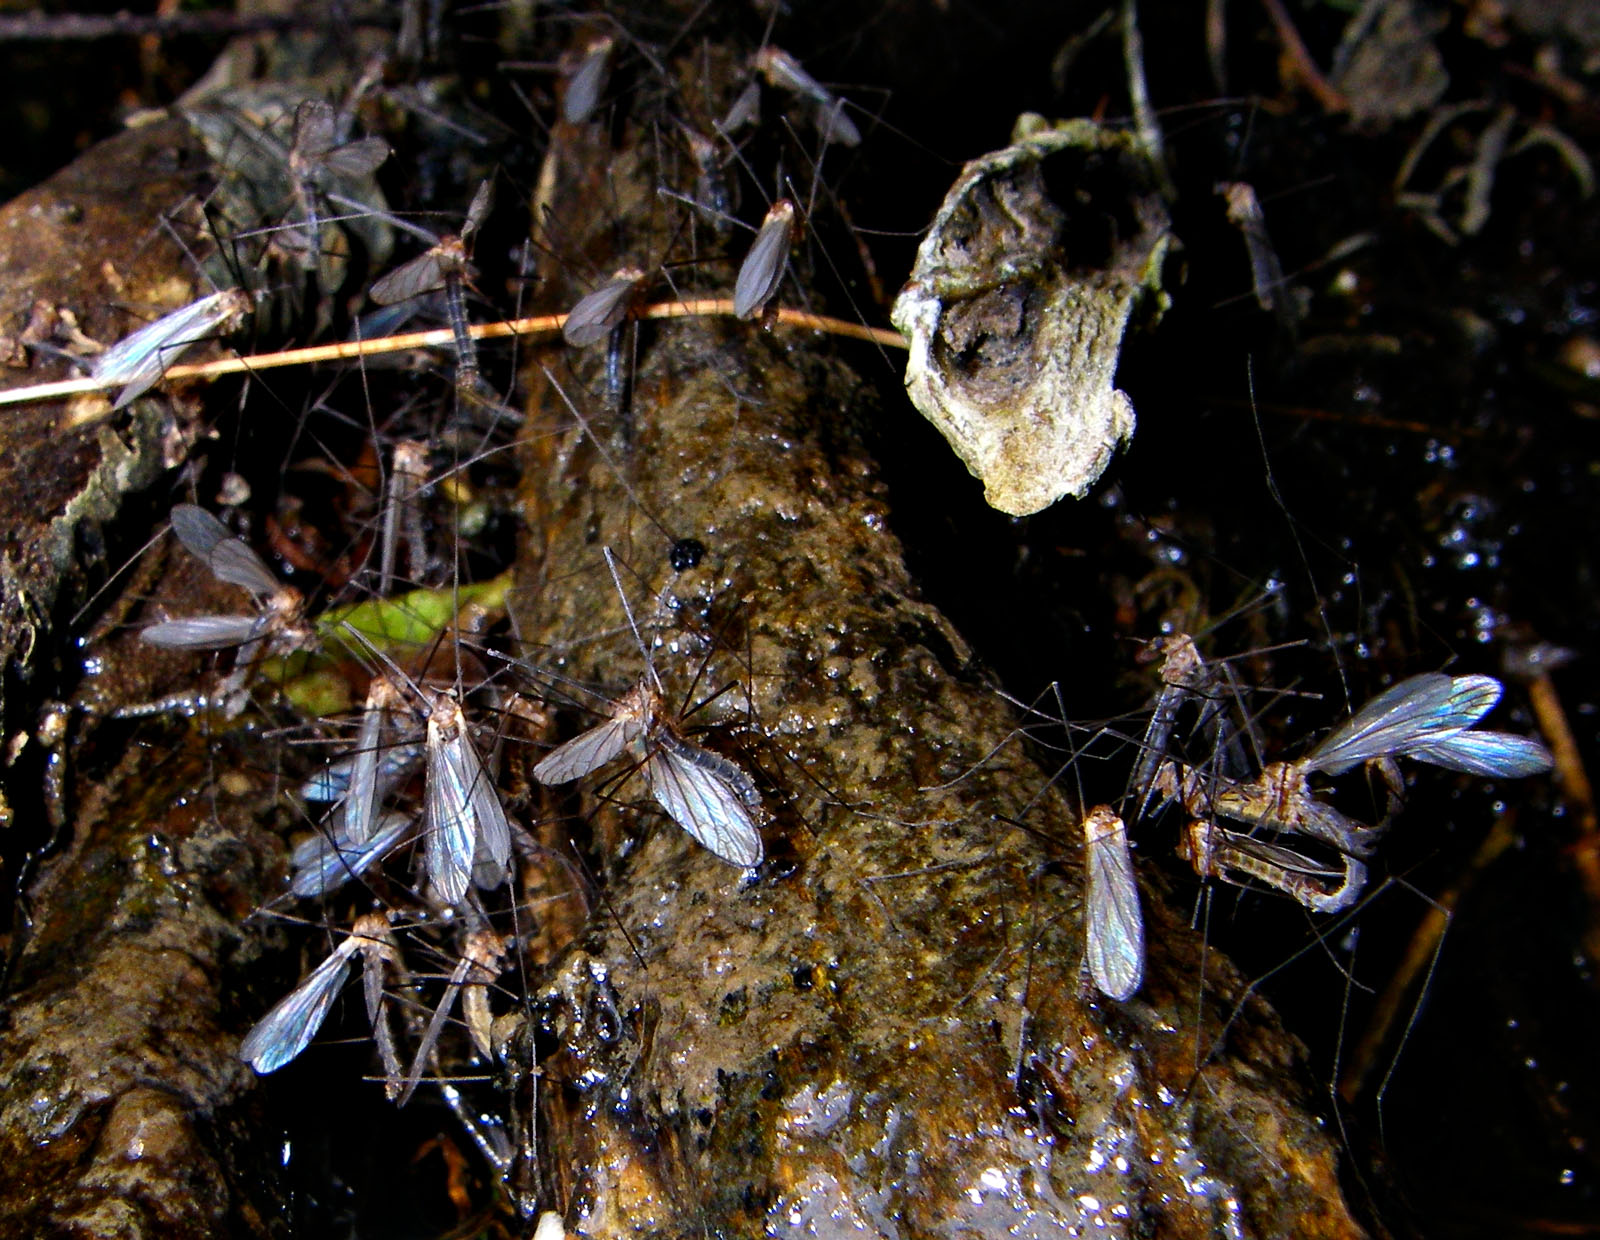 Several craneflies formed a mating cluster here in a dark rootwad along the bank of a large limestone trout stream. From Penn's Creek in Pennsylvania.